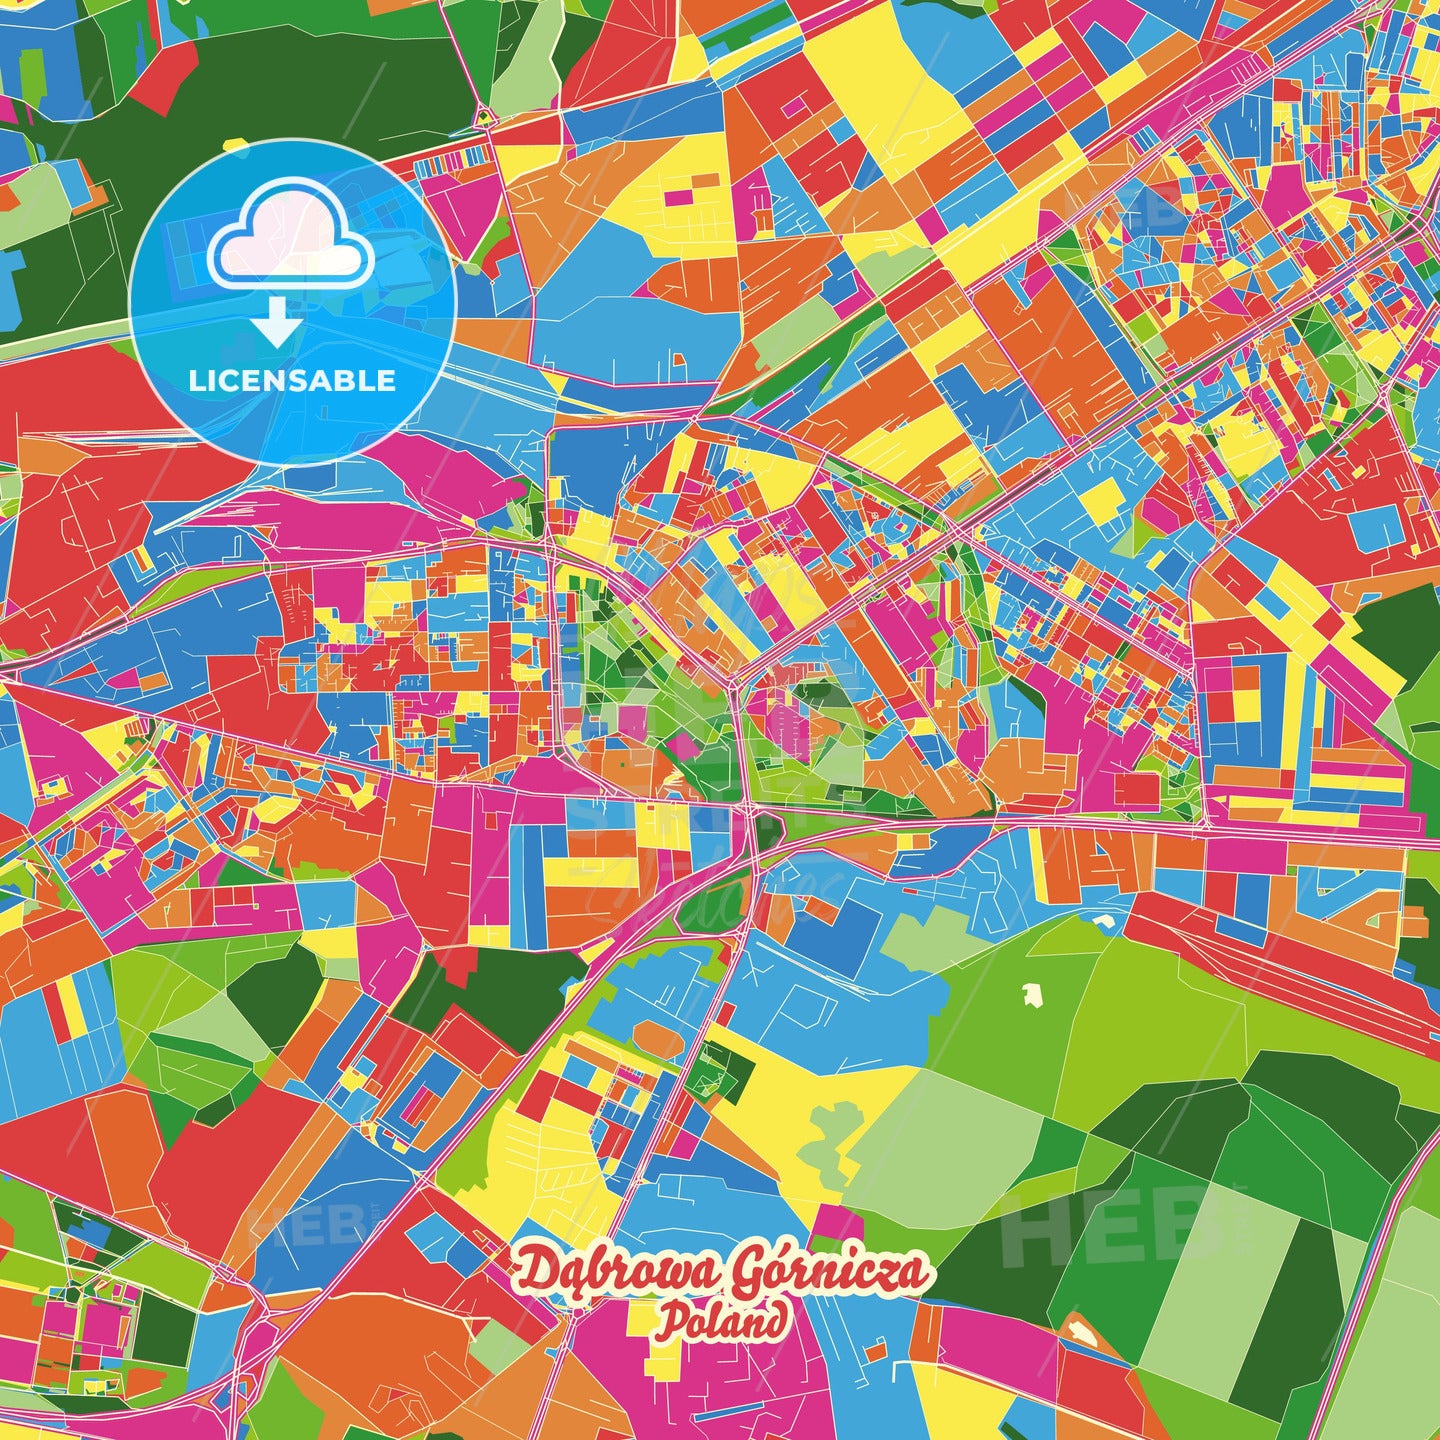 Dąbrowa Górnicza, Poland Crazy Colorful Street Map Poster Template - HEBSTREITS Sketches